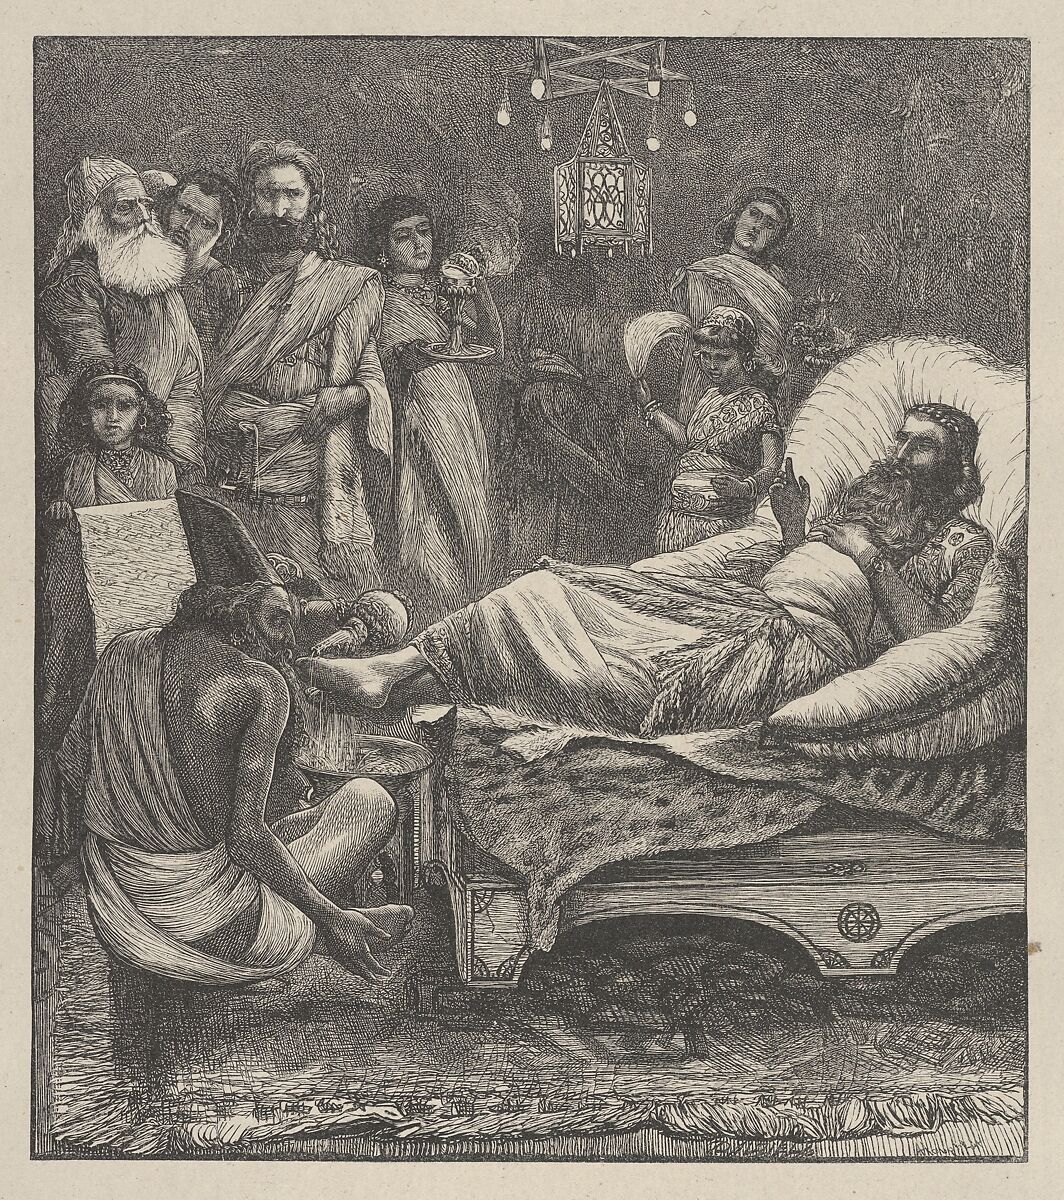 The Chronicles Being Read to the King, from "Dalziels' Bible Gallery", After Arthur Boyd Houghton (British (born India), Madras 1836–1875 London), Wood engraving on India paper, mounted on thin card 